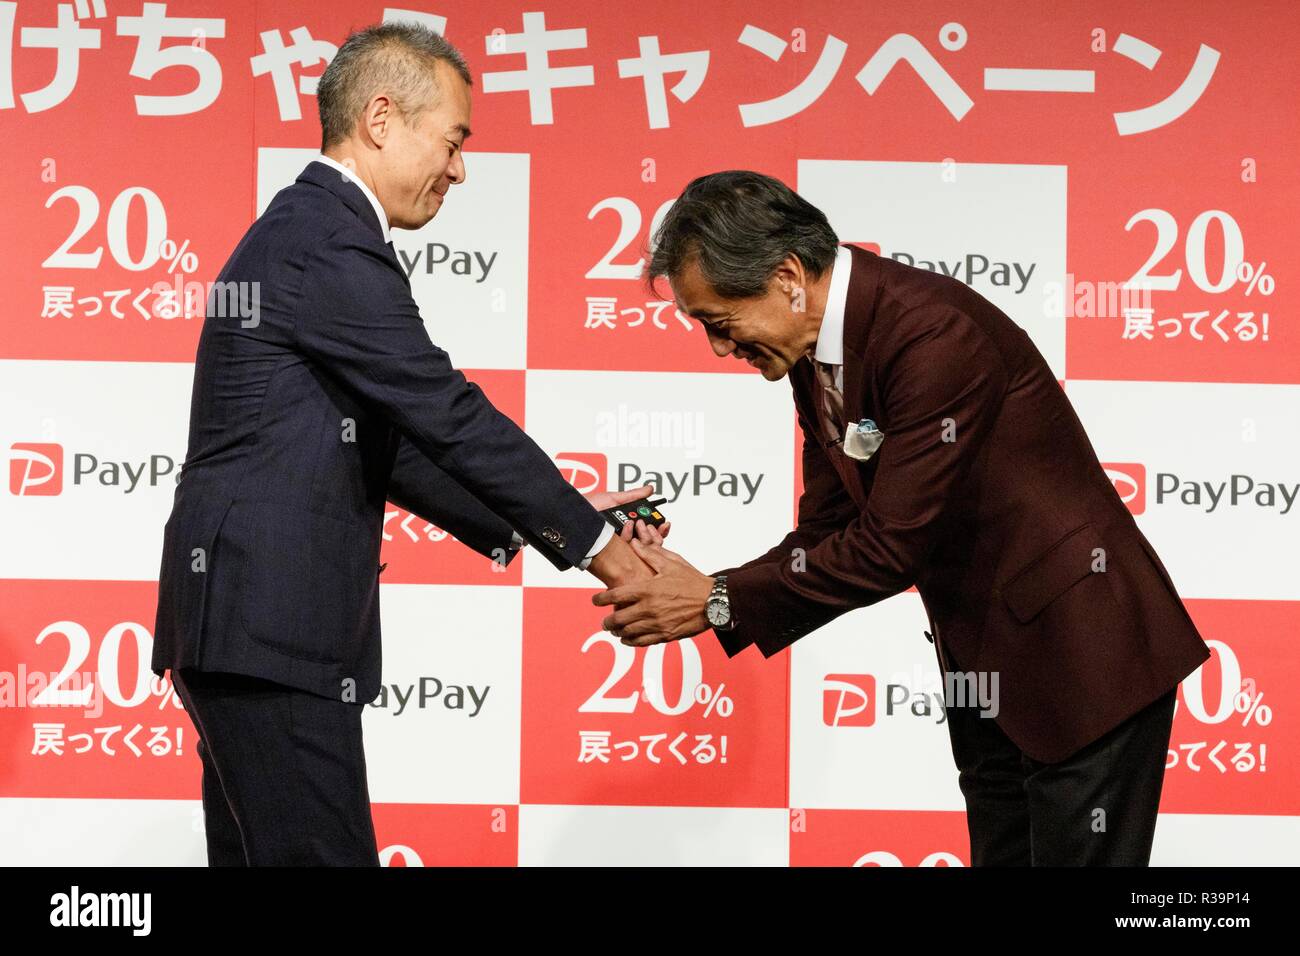 (L to R) Ichiro Nakayama, president and CEO of PayPay Corp. shake hands with Takashi Sawada president of Japan's convenience store FamilyMart, during a news conference to announce the new smartphone payment service ''PayPay'' on November 22, 2018, Tokyo, Japan. PayPay is a smartphone payment service using barcodes (QR codes) supported by SoftBank, Yahoo Japan and Paytm, that can be used in Japanese stores including Bic Camera, Yamada Denki and Family Mart. Credit: Rodrigo Reyes Marin/AFLO/Alamy Live News Stock Photo